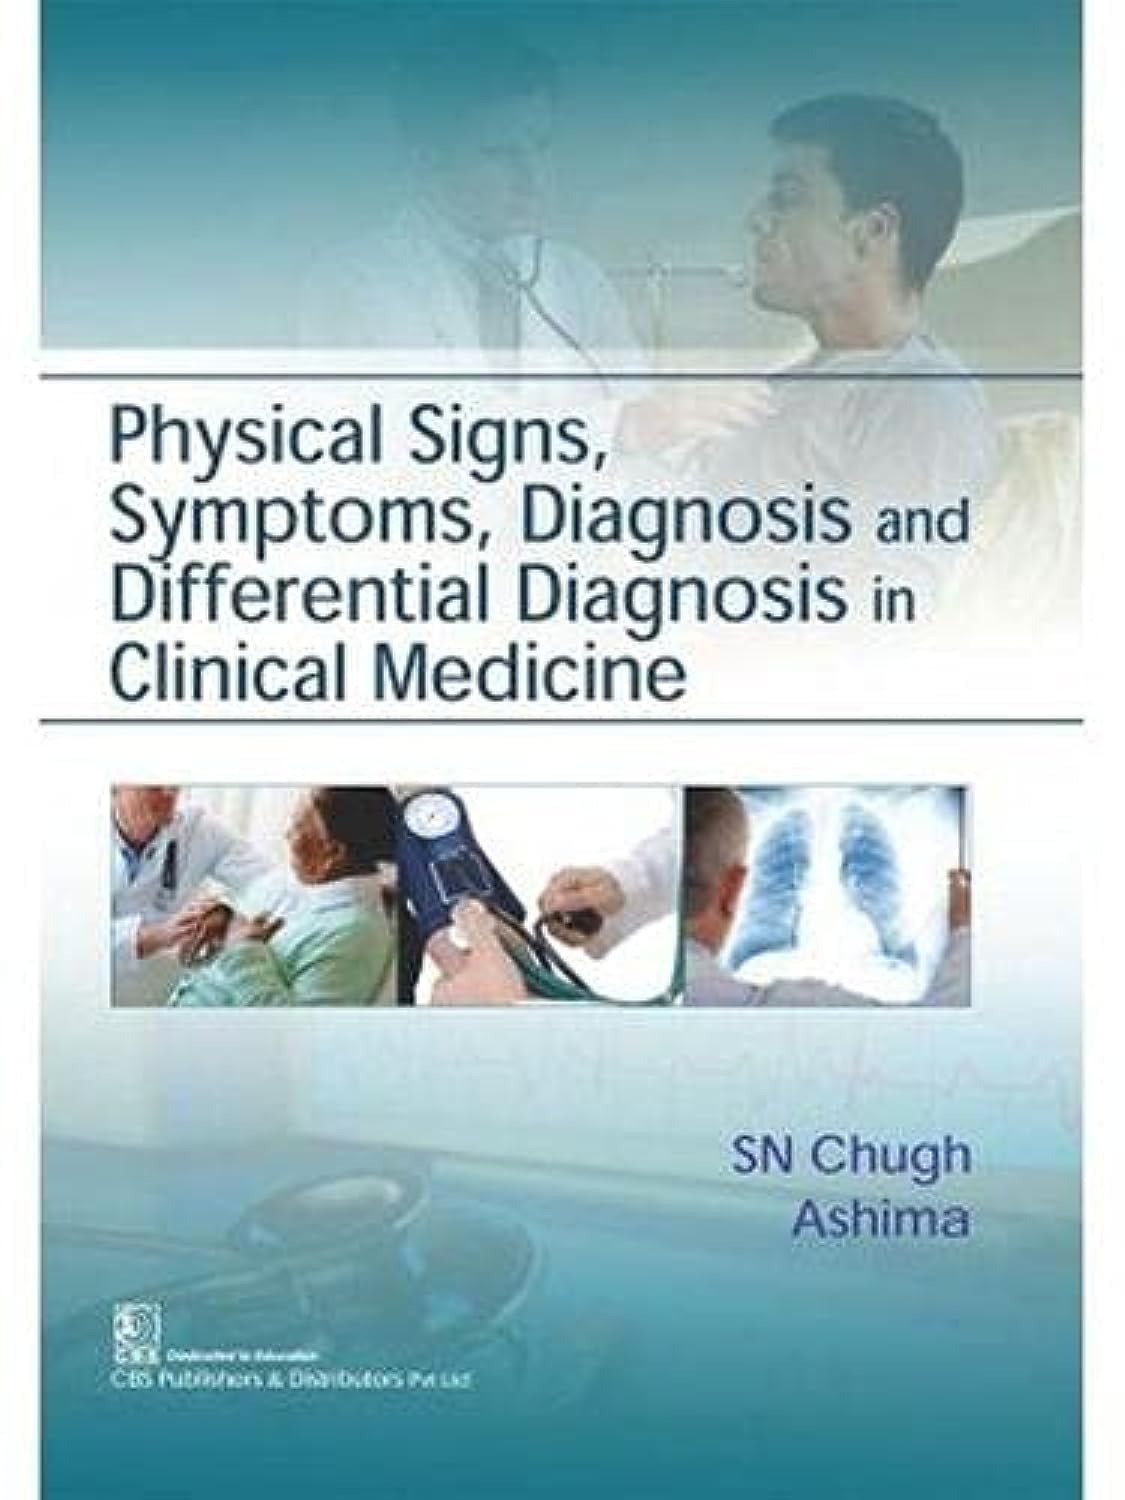 Chugh Sn Physical Signs Symptoms Diagnosis And Differential Diagnosis In Clinical 